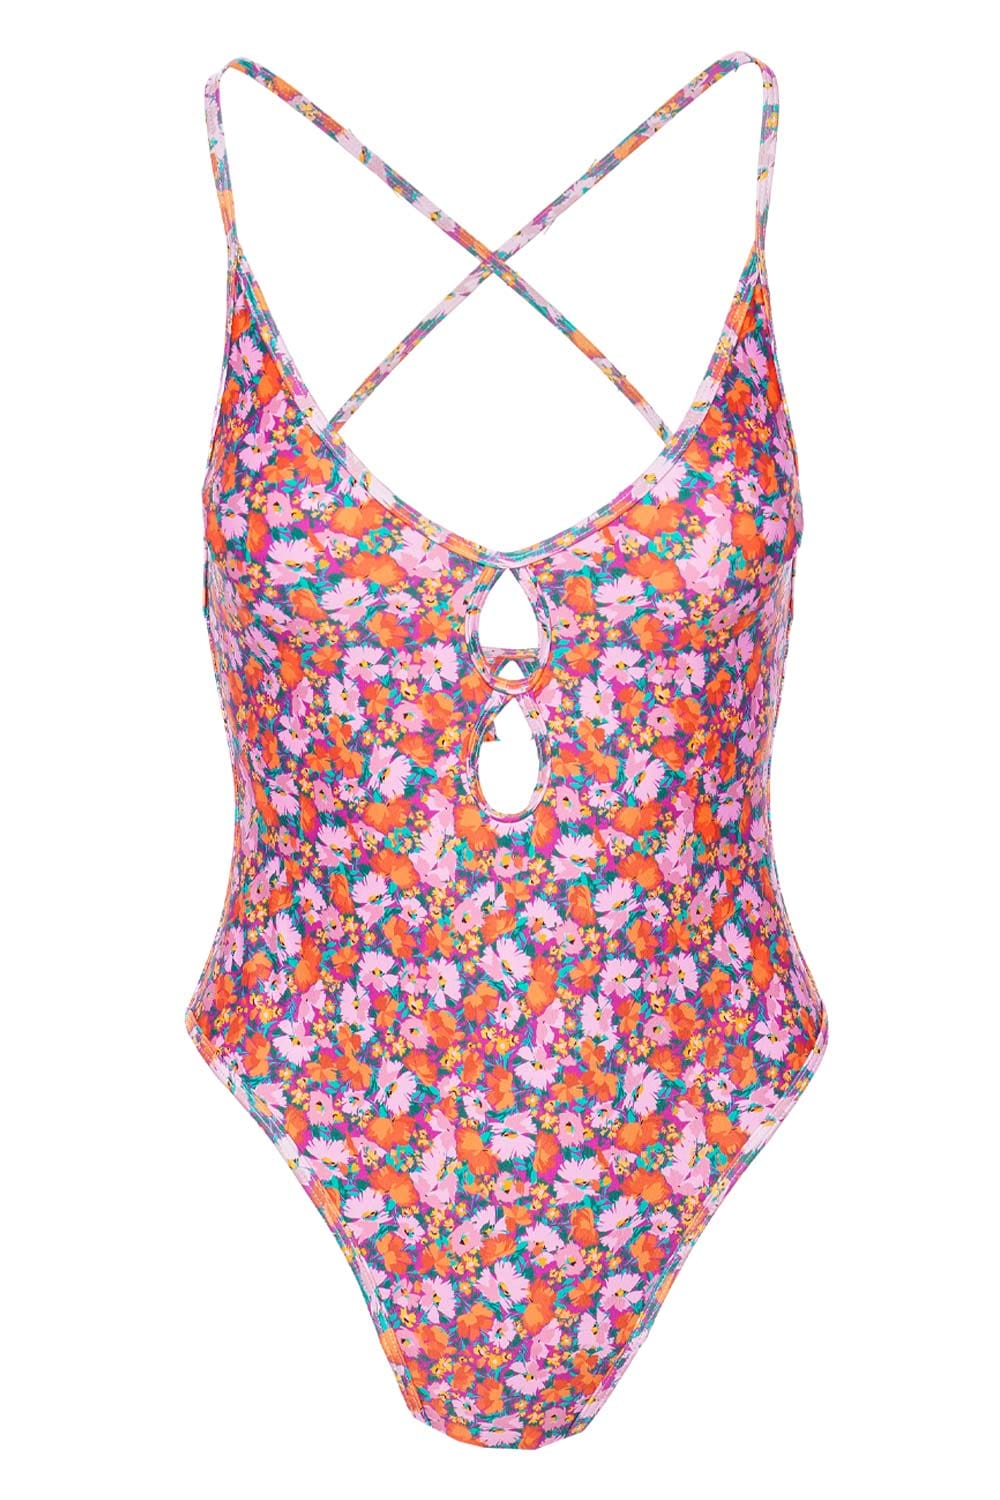 L*Space Clover Positively Poppies One Piece Swimsuit